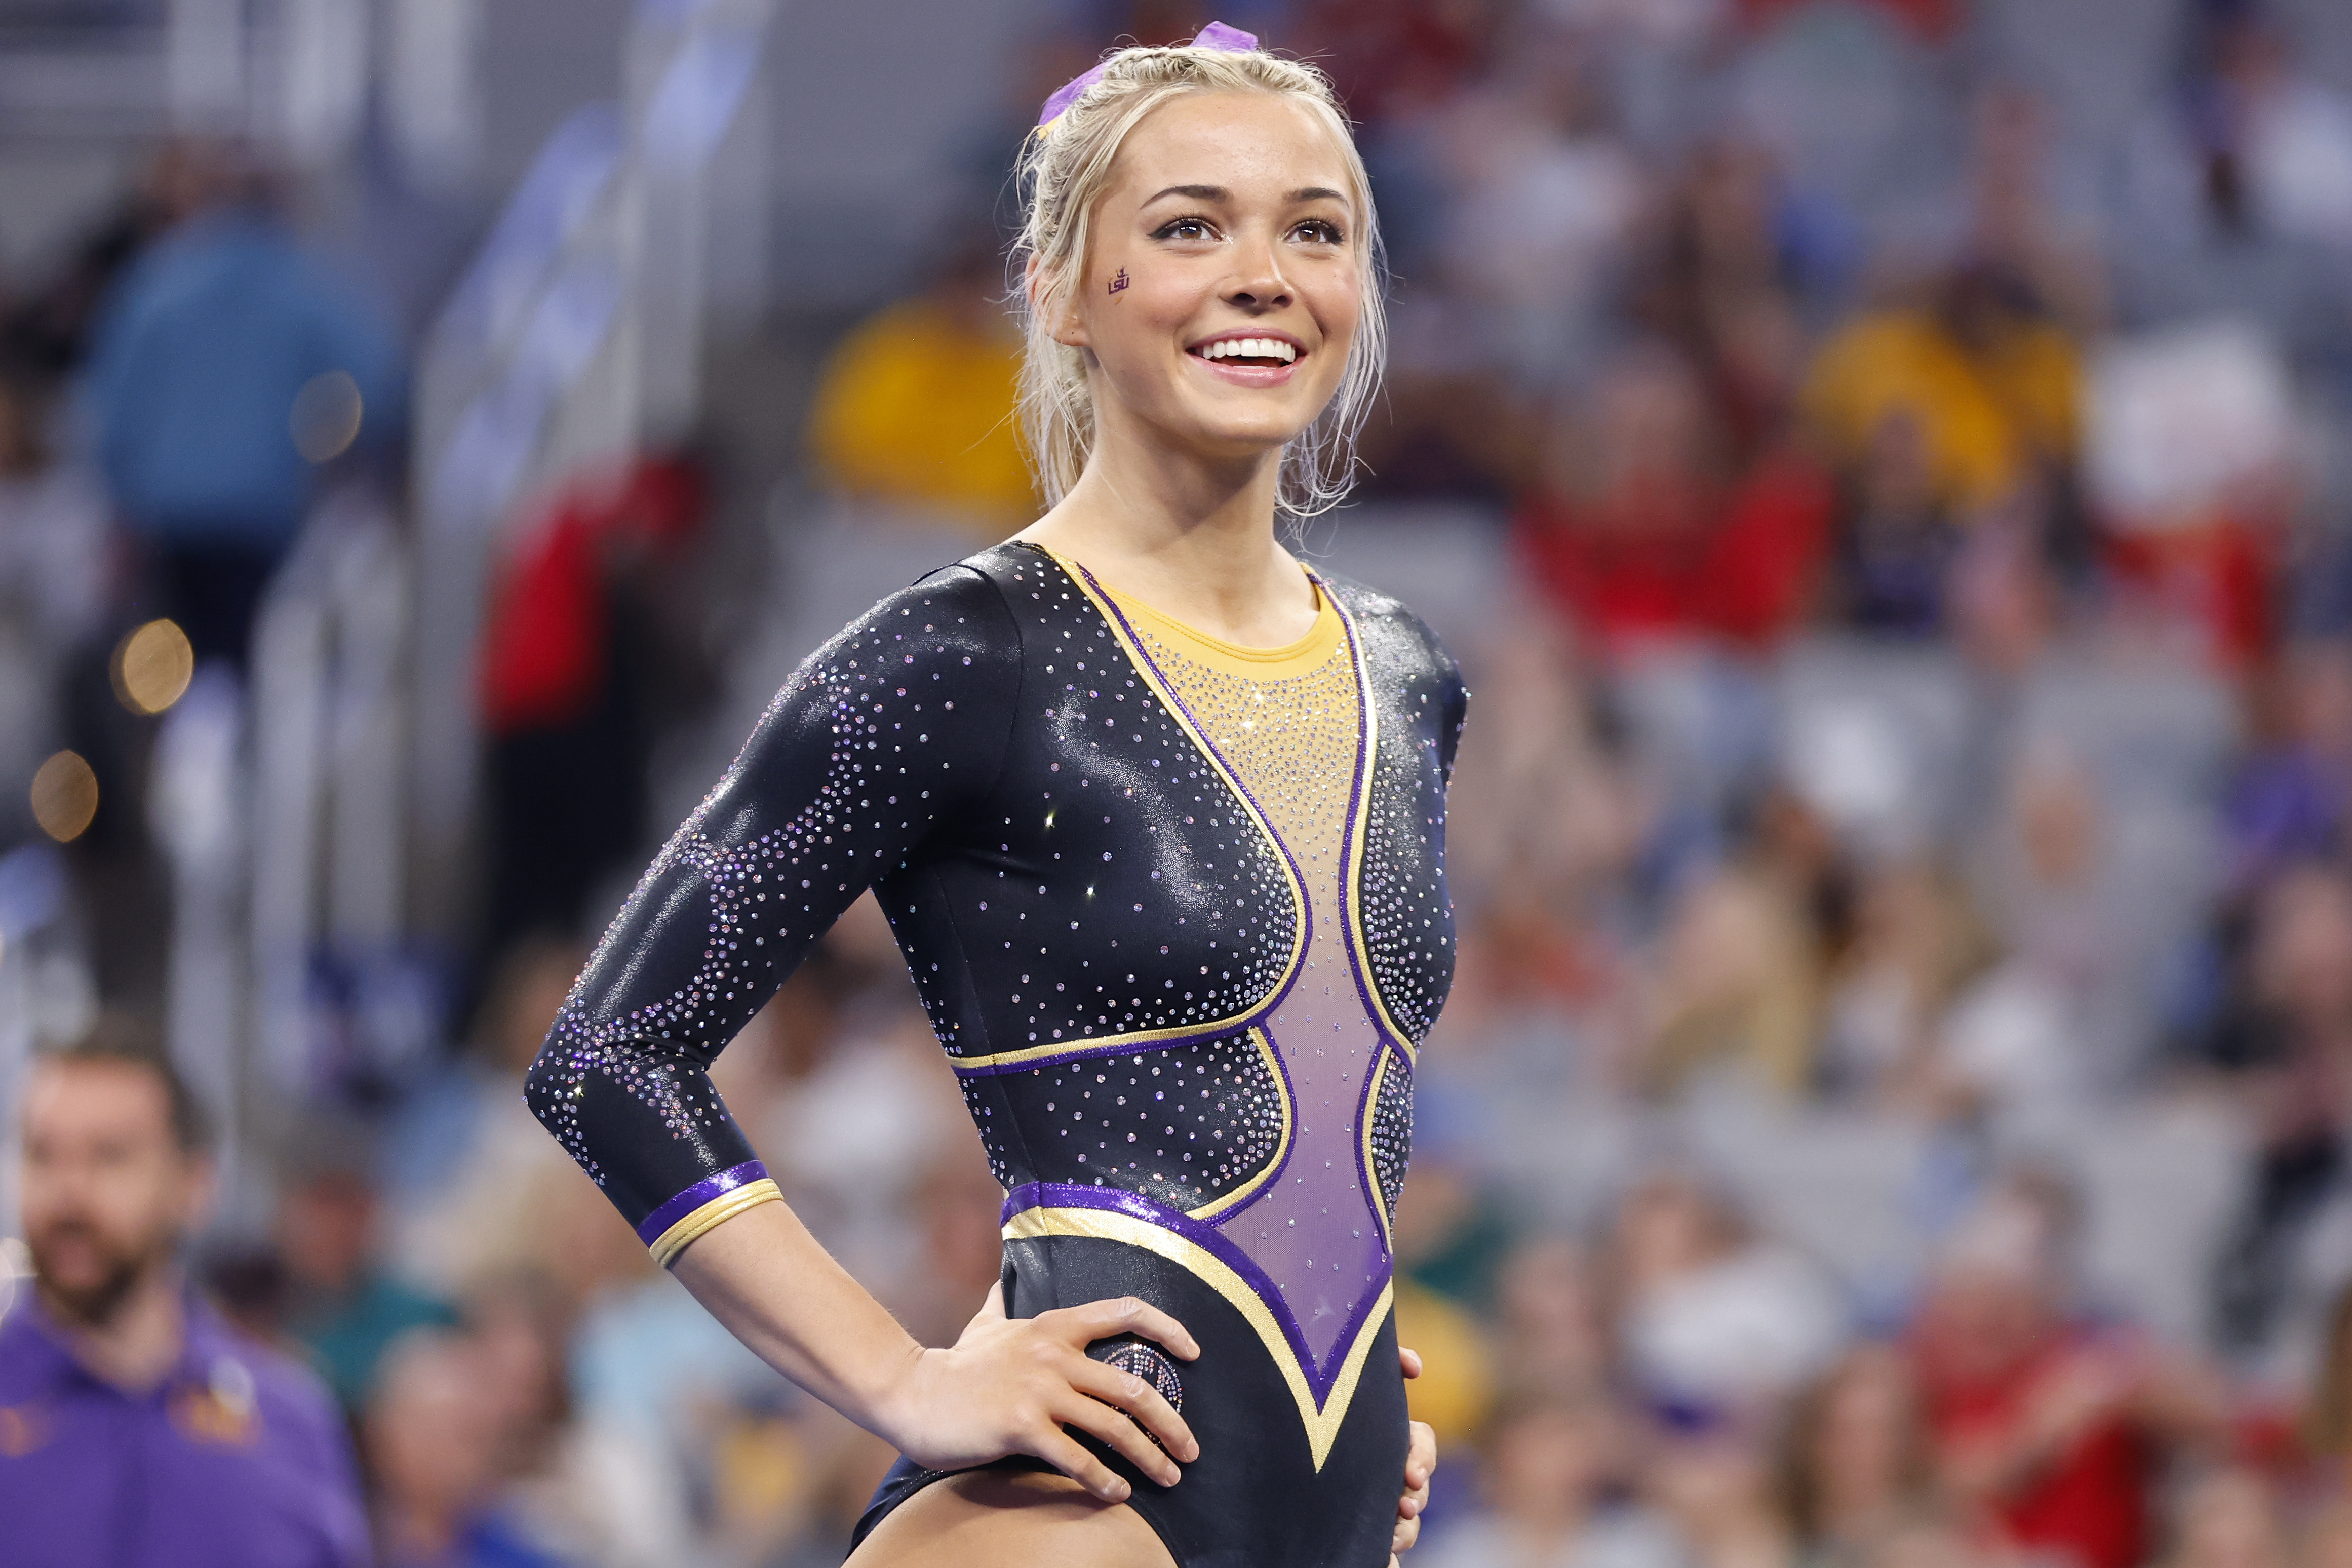 Dunne recently won the NCAA National Championship with LSU